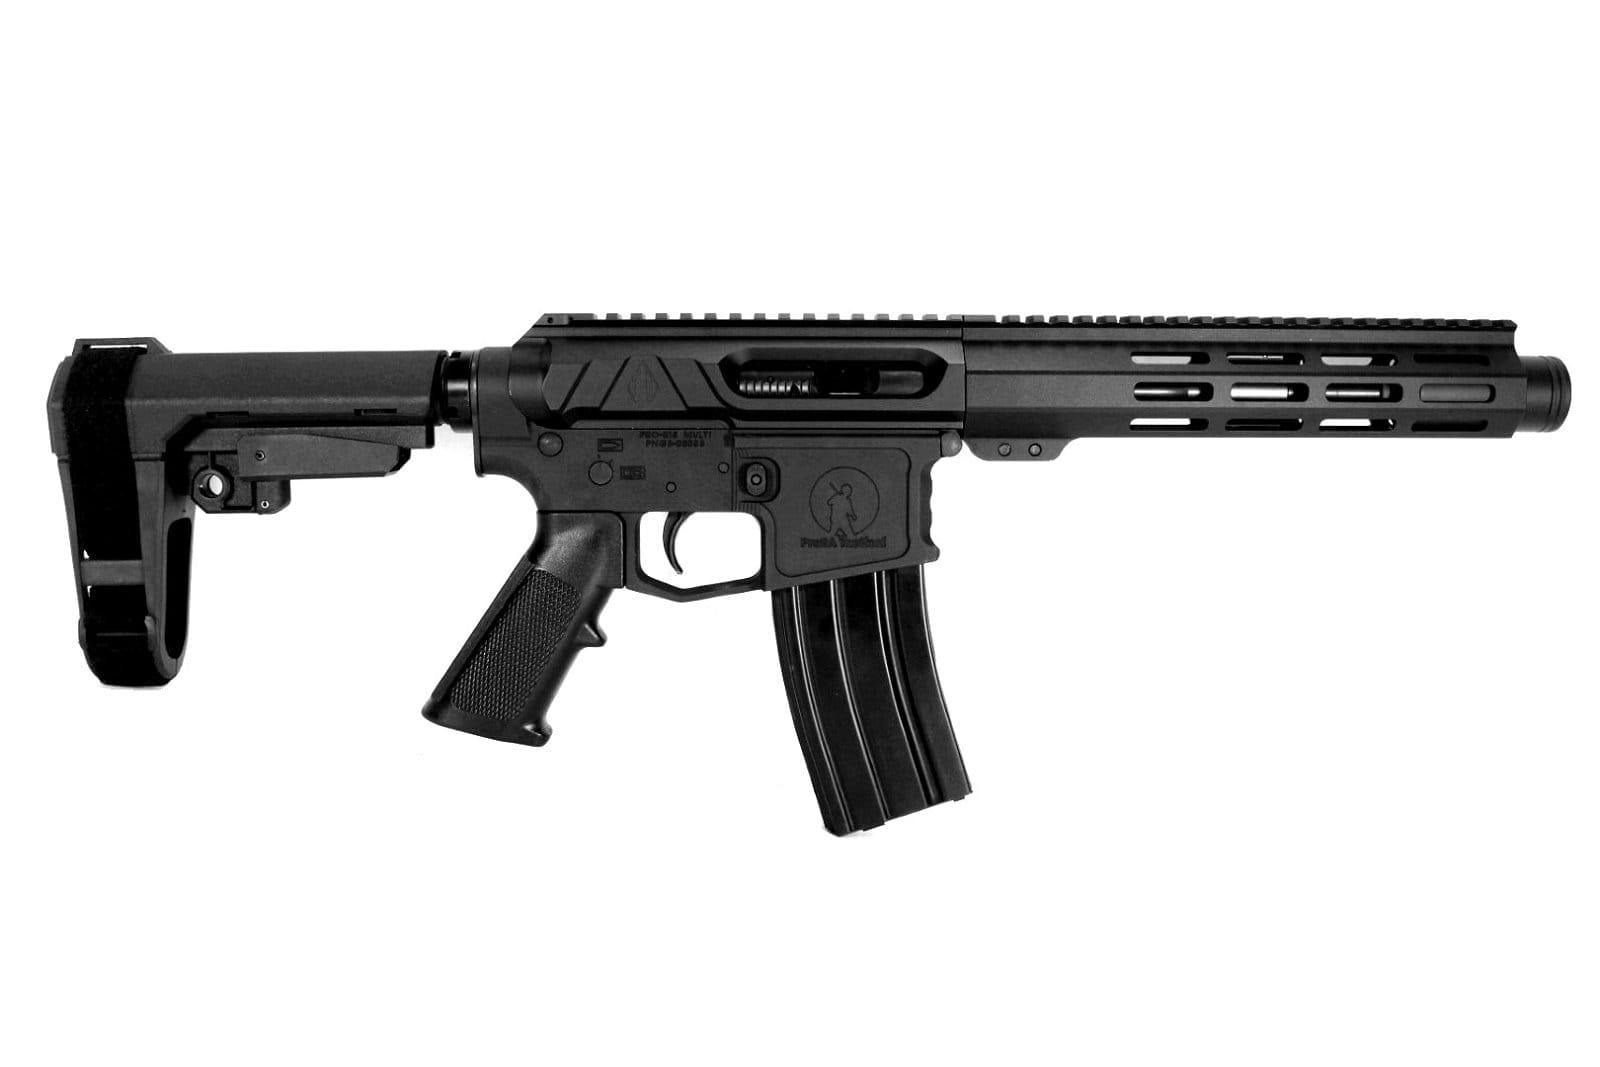 Image of P2A VALIANT 7.5" 450 Bushmaster 1/24 Pistol Length Melonite M-LOK Pistol with Flash Can